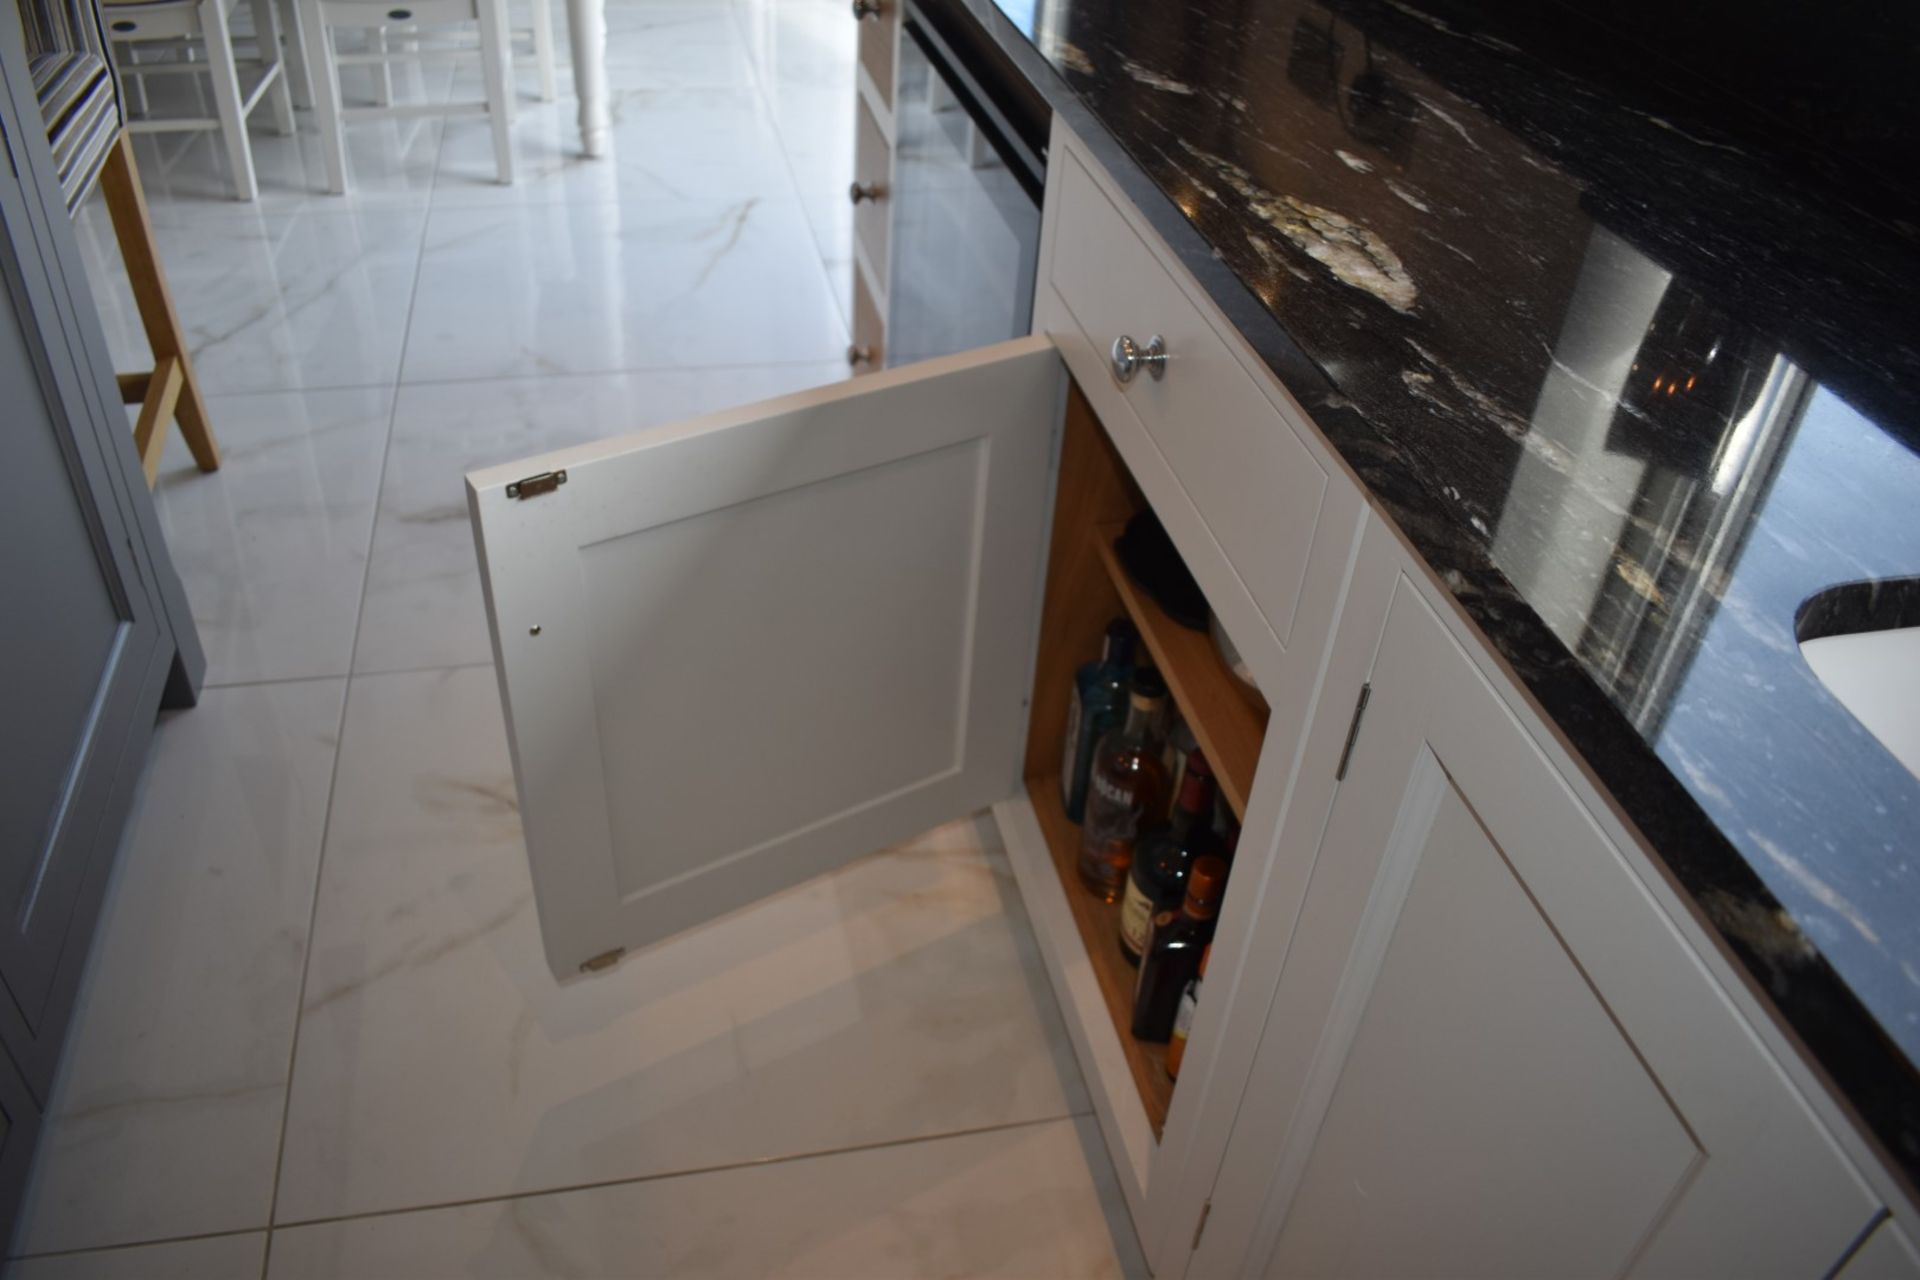 1 x Bespoke Handmade Framed Fitted Kitchen By Matthew Marsden Furniture - Features Hand Painted - Image 65 of 97